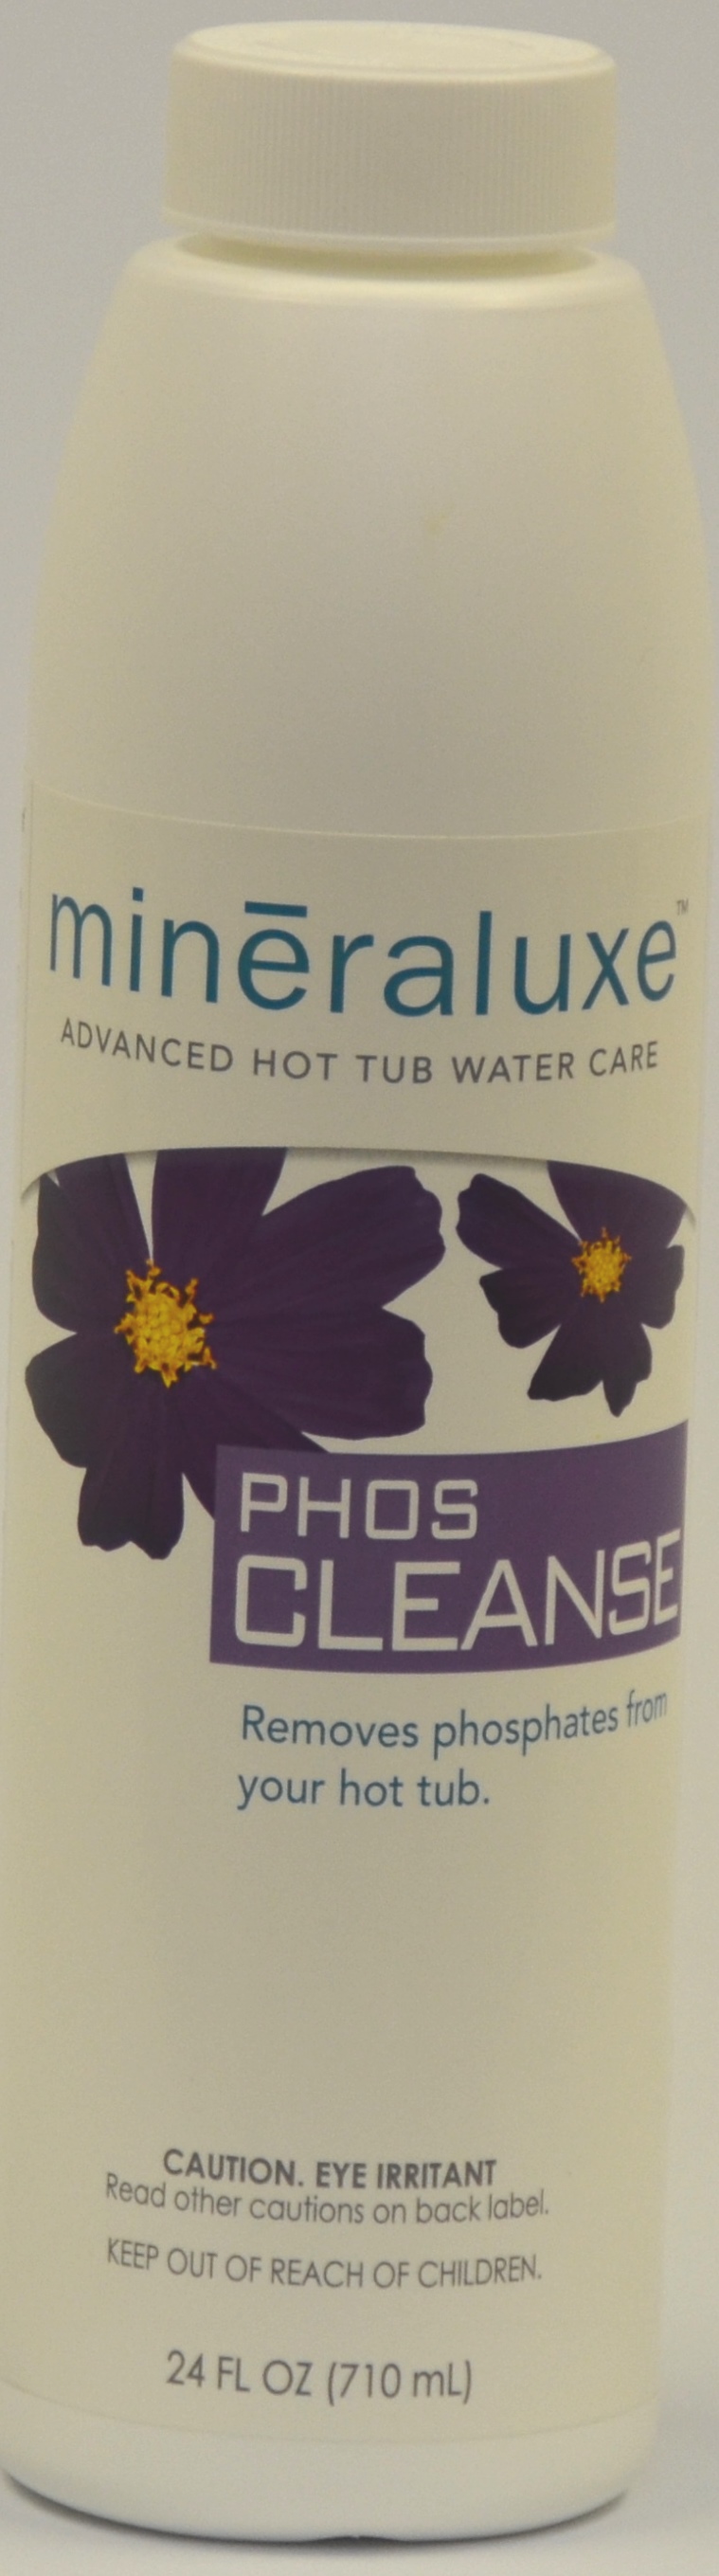 Mineraluxe Phos Cleanse 16 X 24 oz - MAYTRONICS